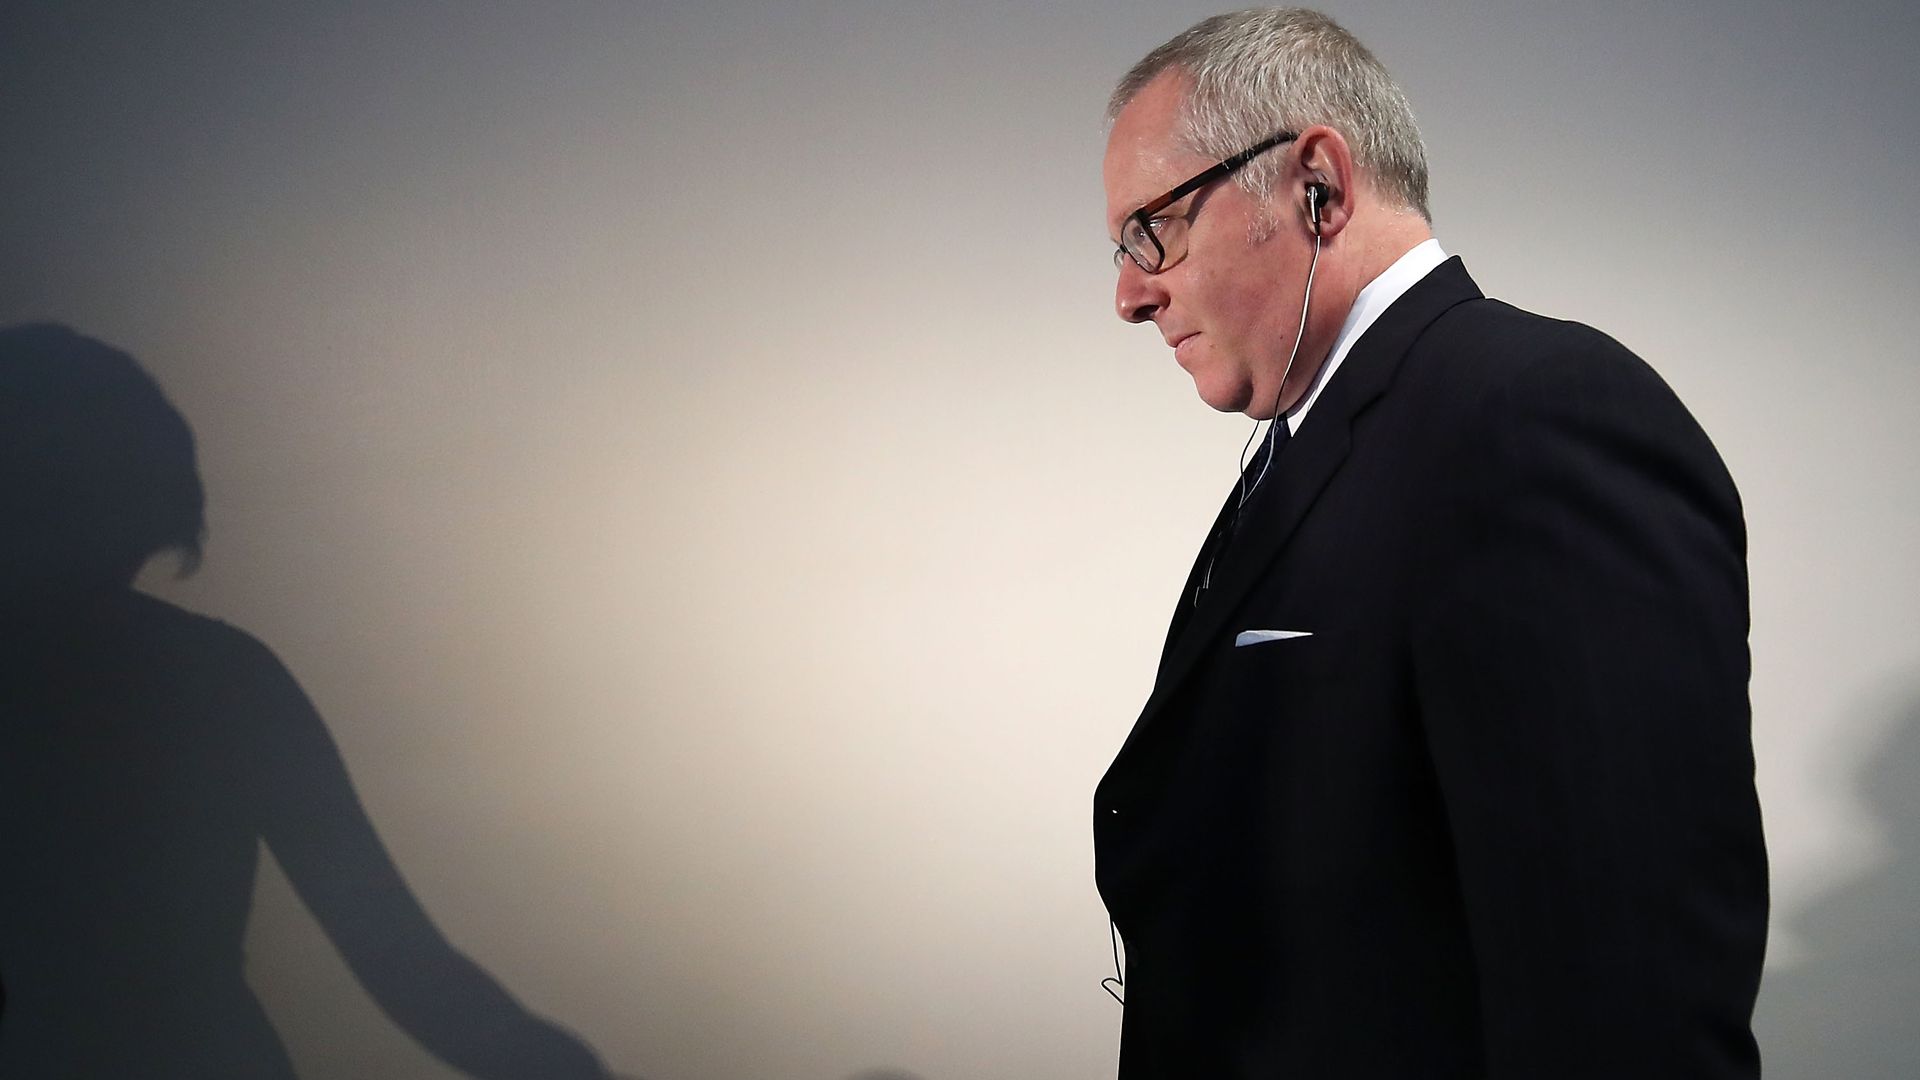 Michael Caputo stands in a suit and walks down a hallway